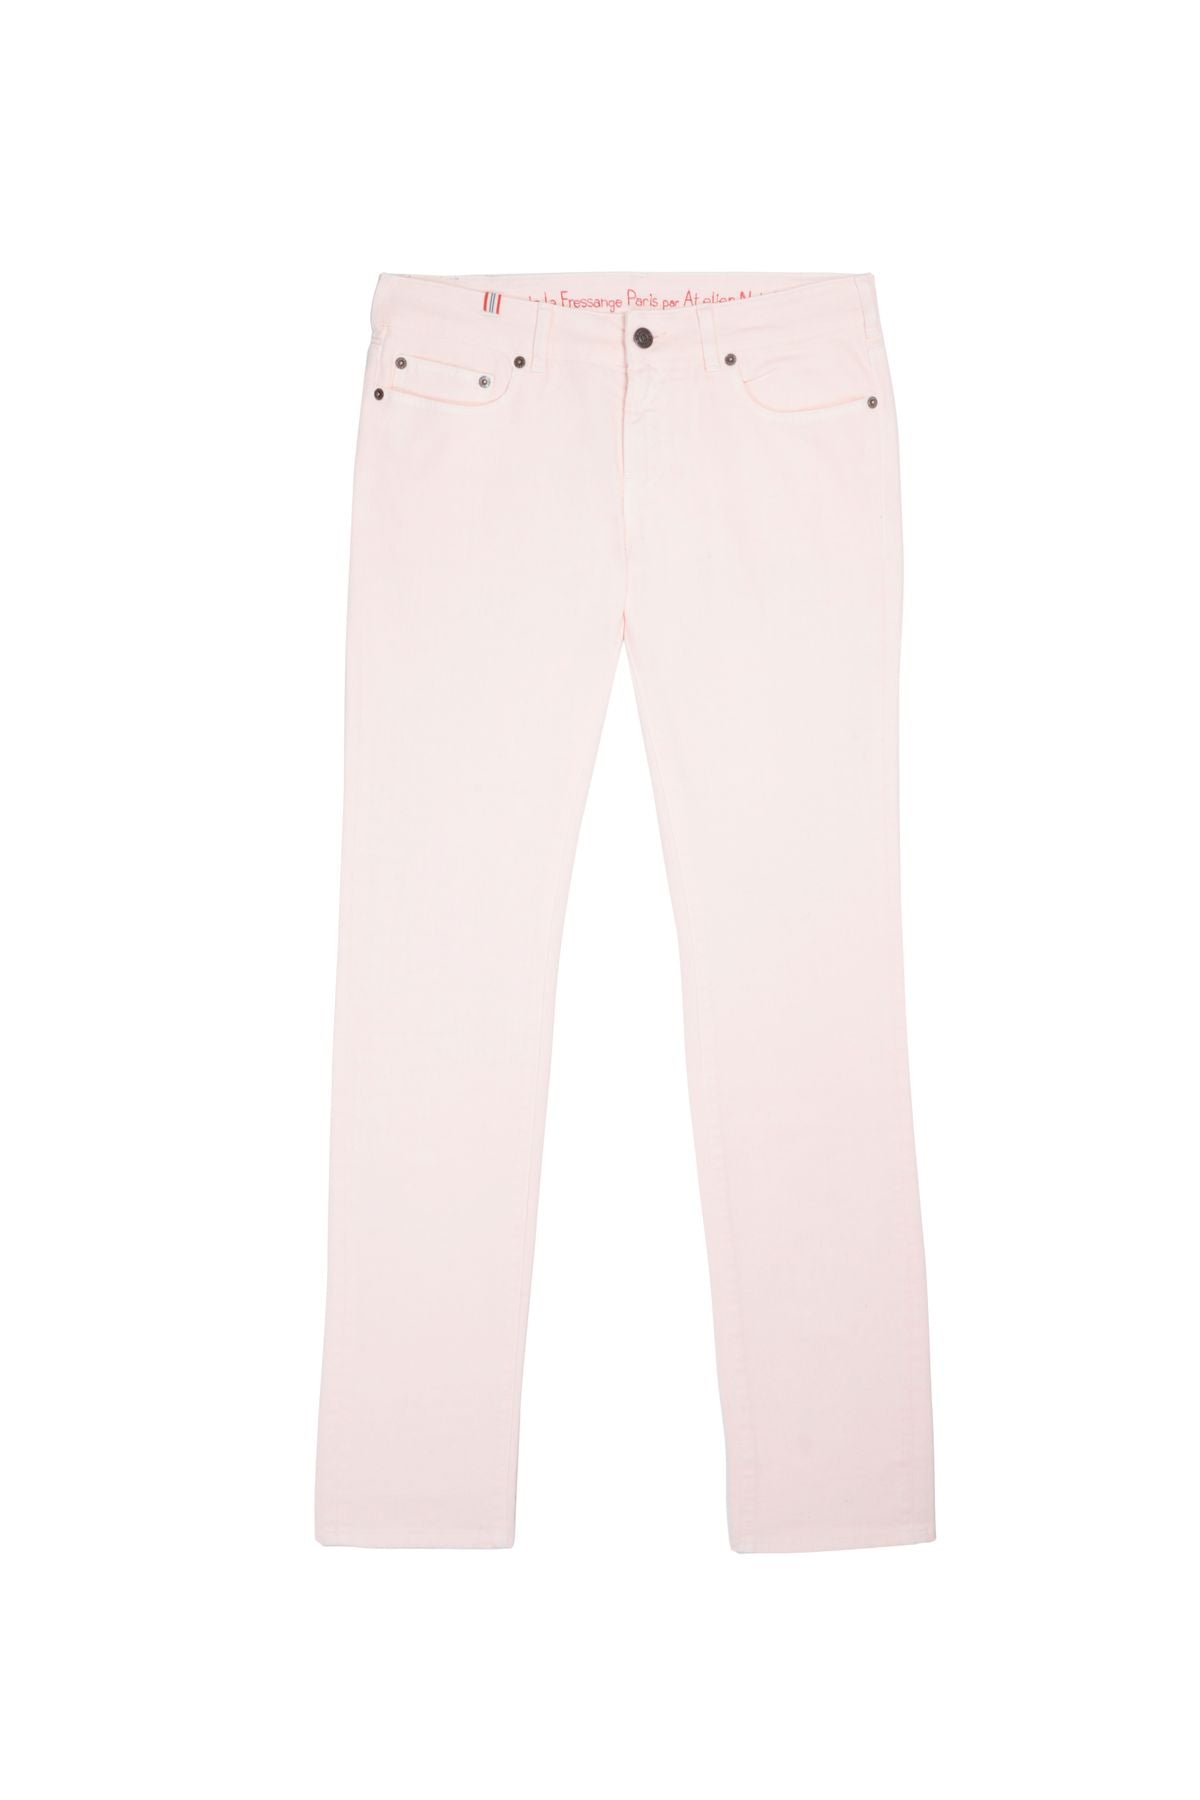 jean-in-cotton-pink-x-notify